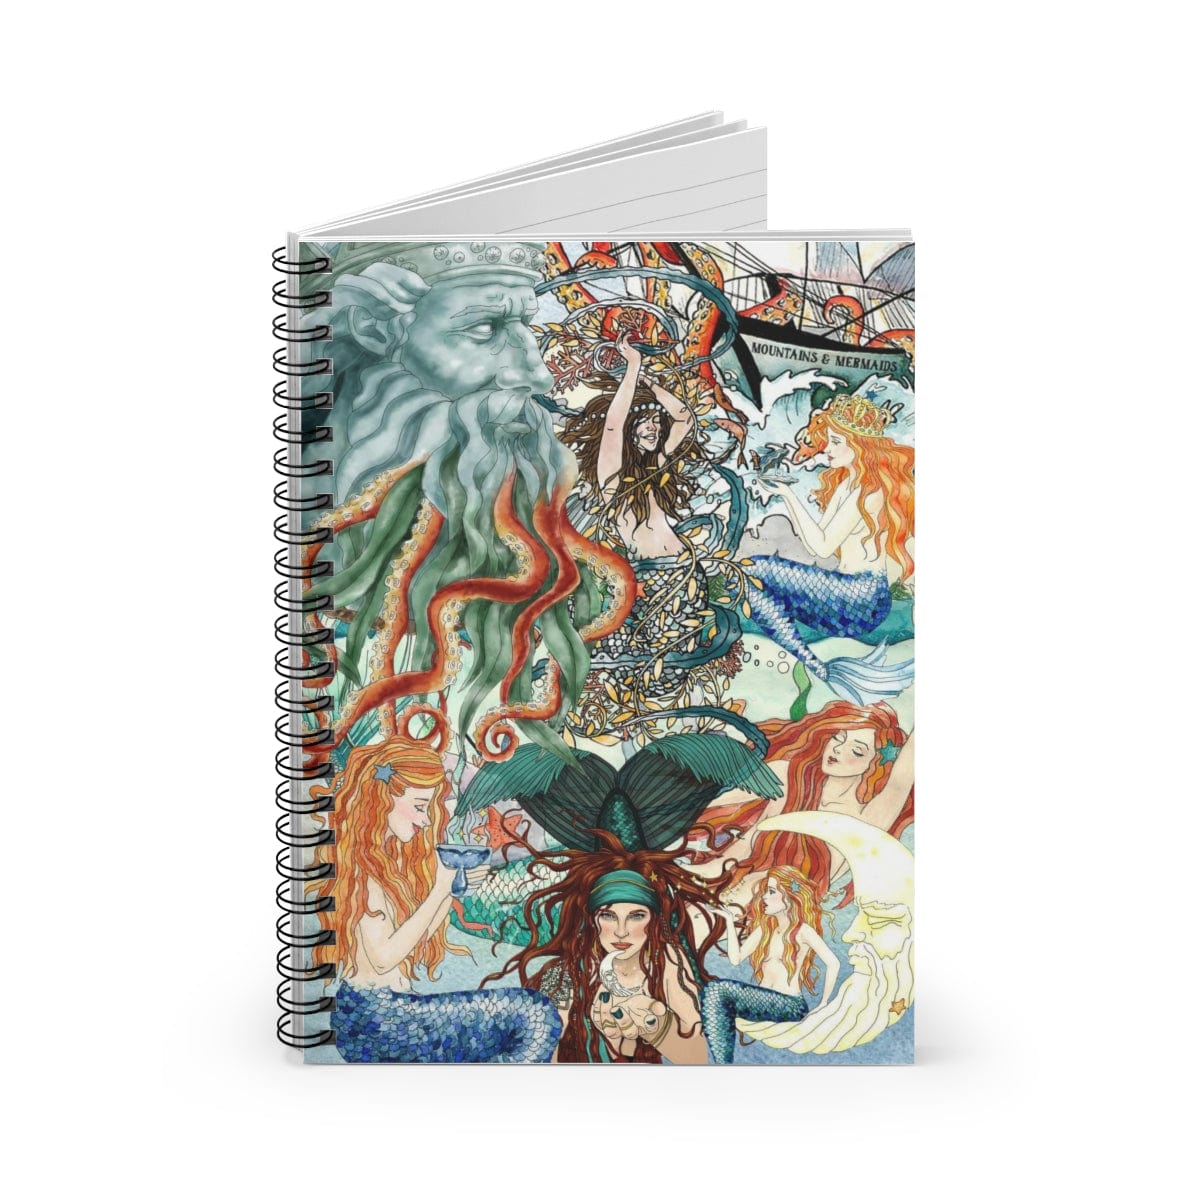 Mountains & Mermaids Tribe Spiral Notebook - Ruled Line - Mountains & Mermaids